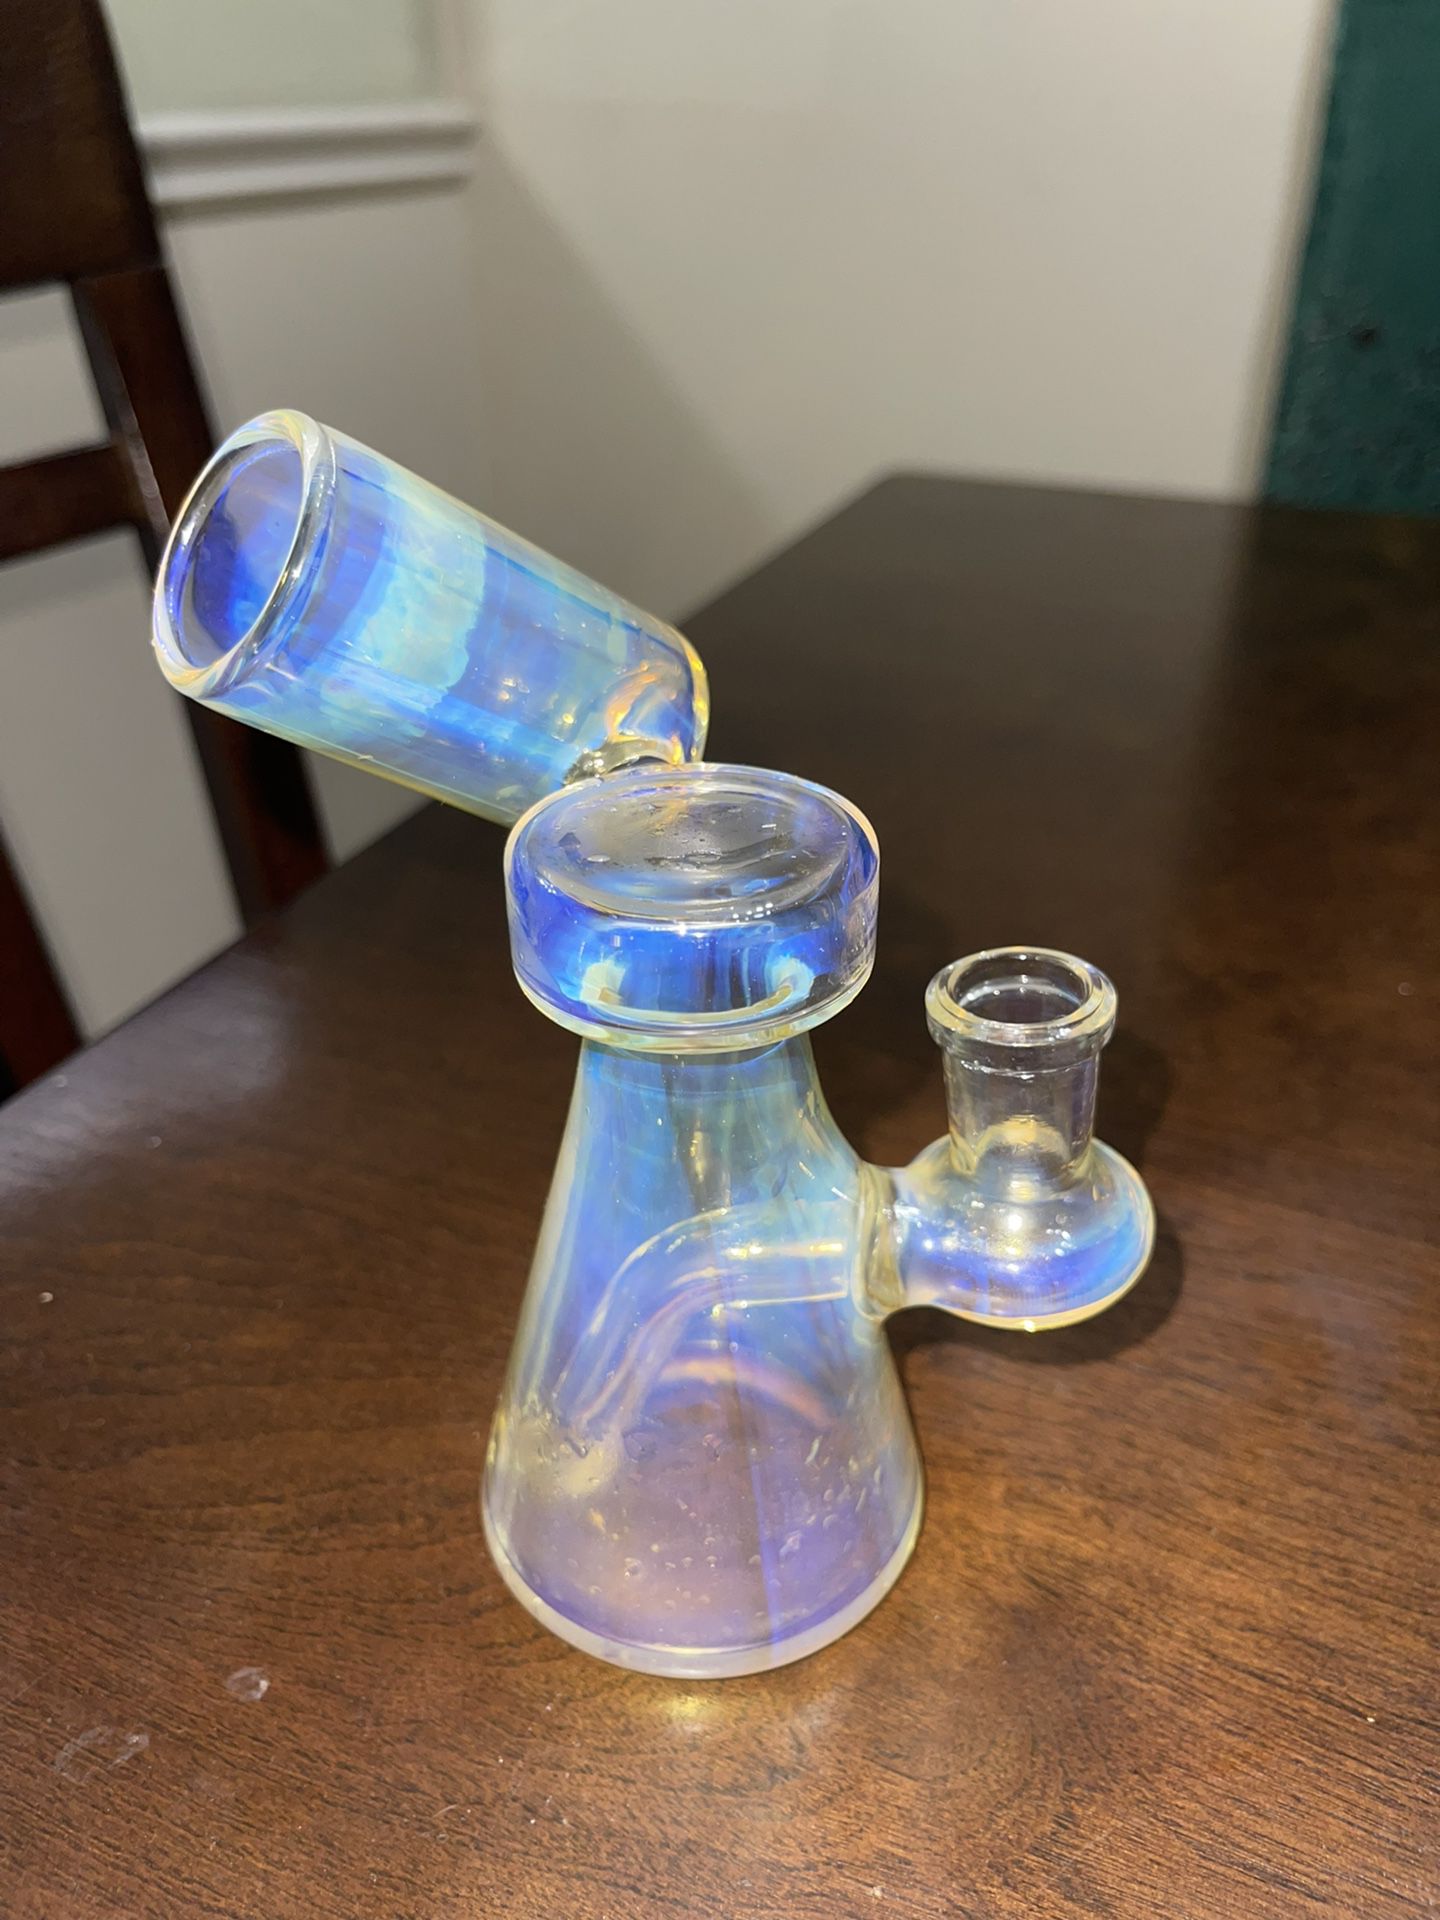 Rig/Water Pipe